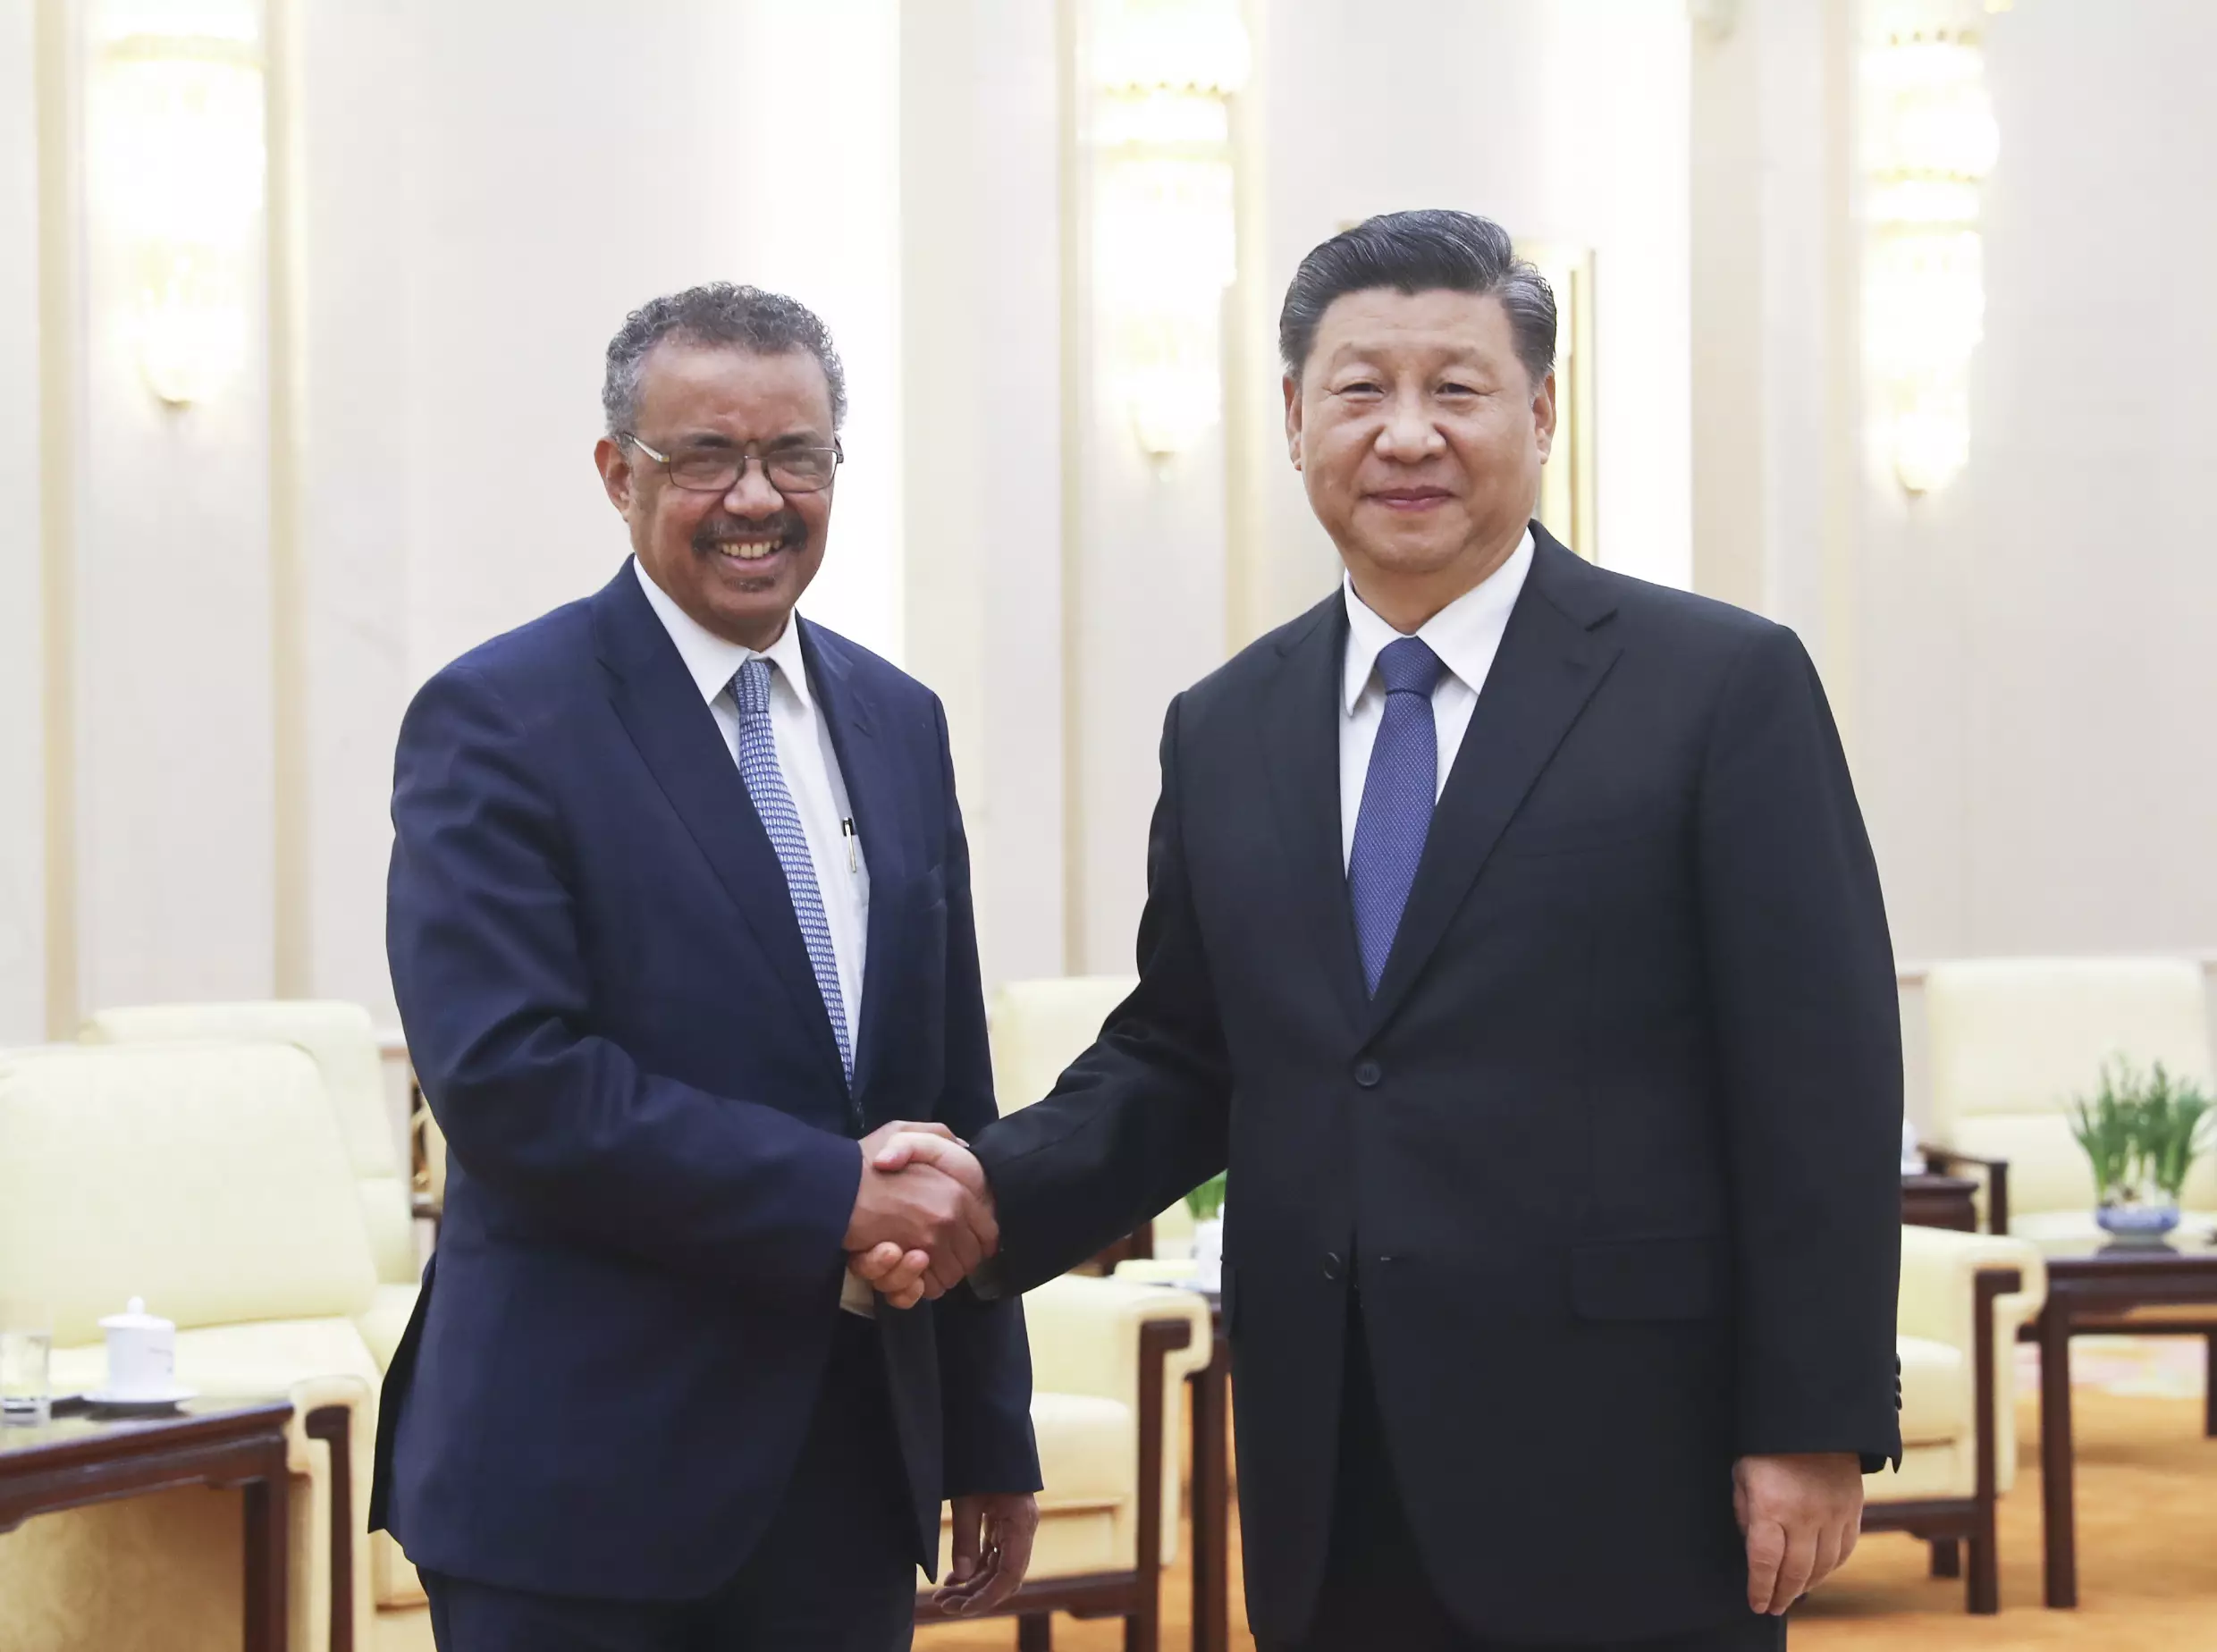 WHO Chief Tedros Adhanom Ghebreyesus with Chinese President Xi Jinping.